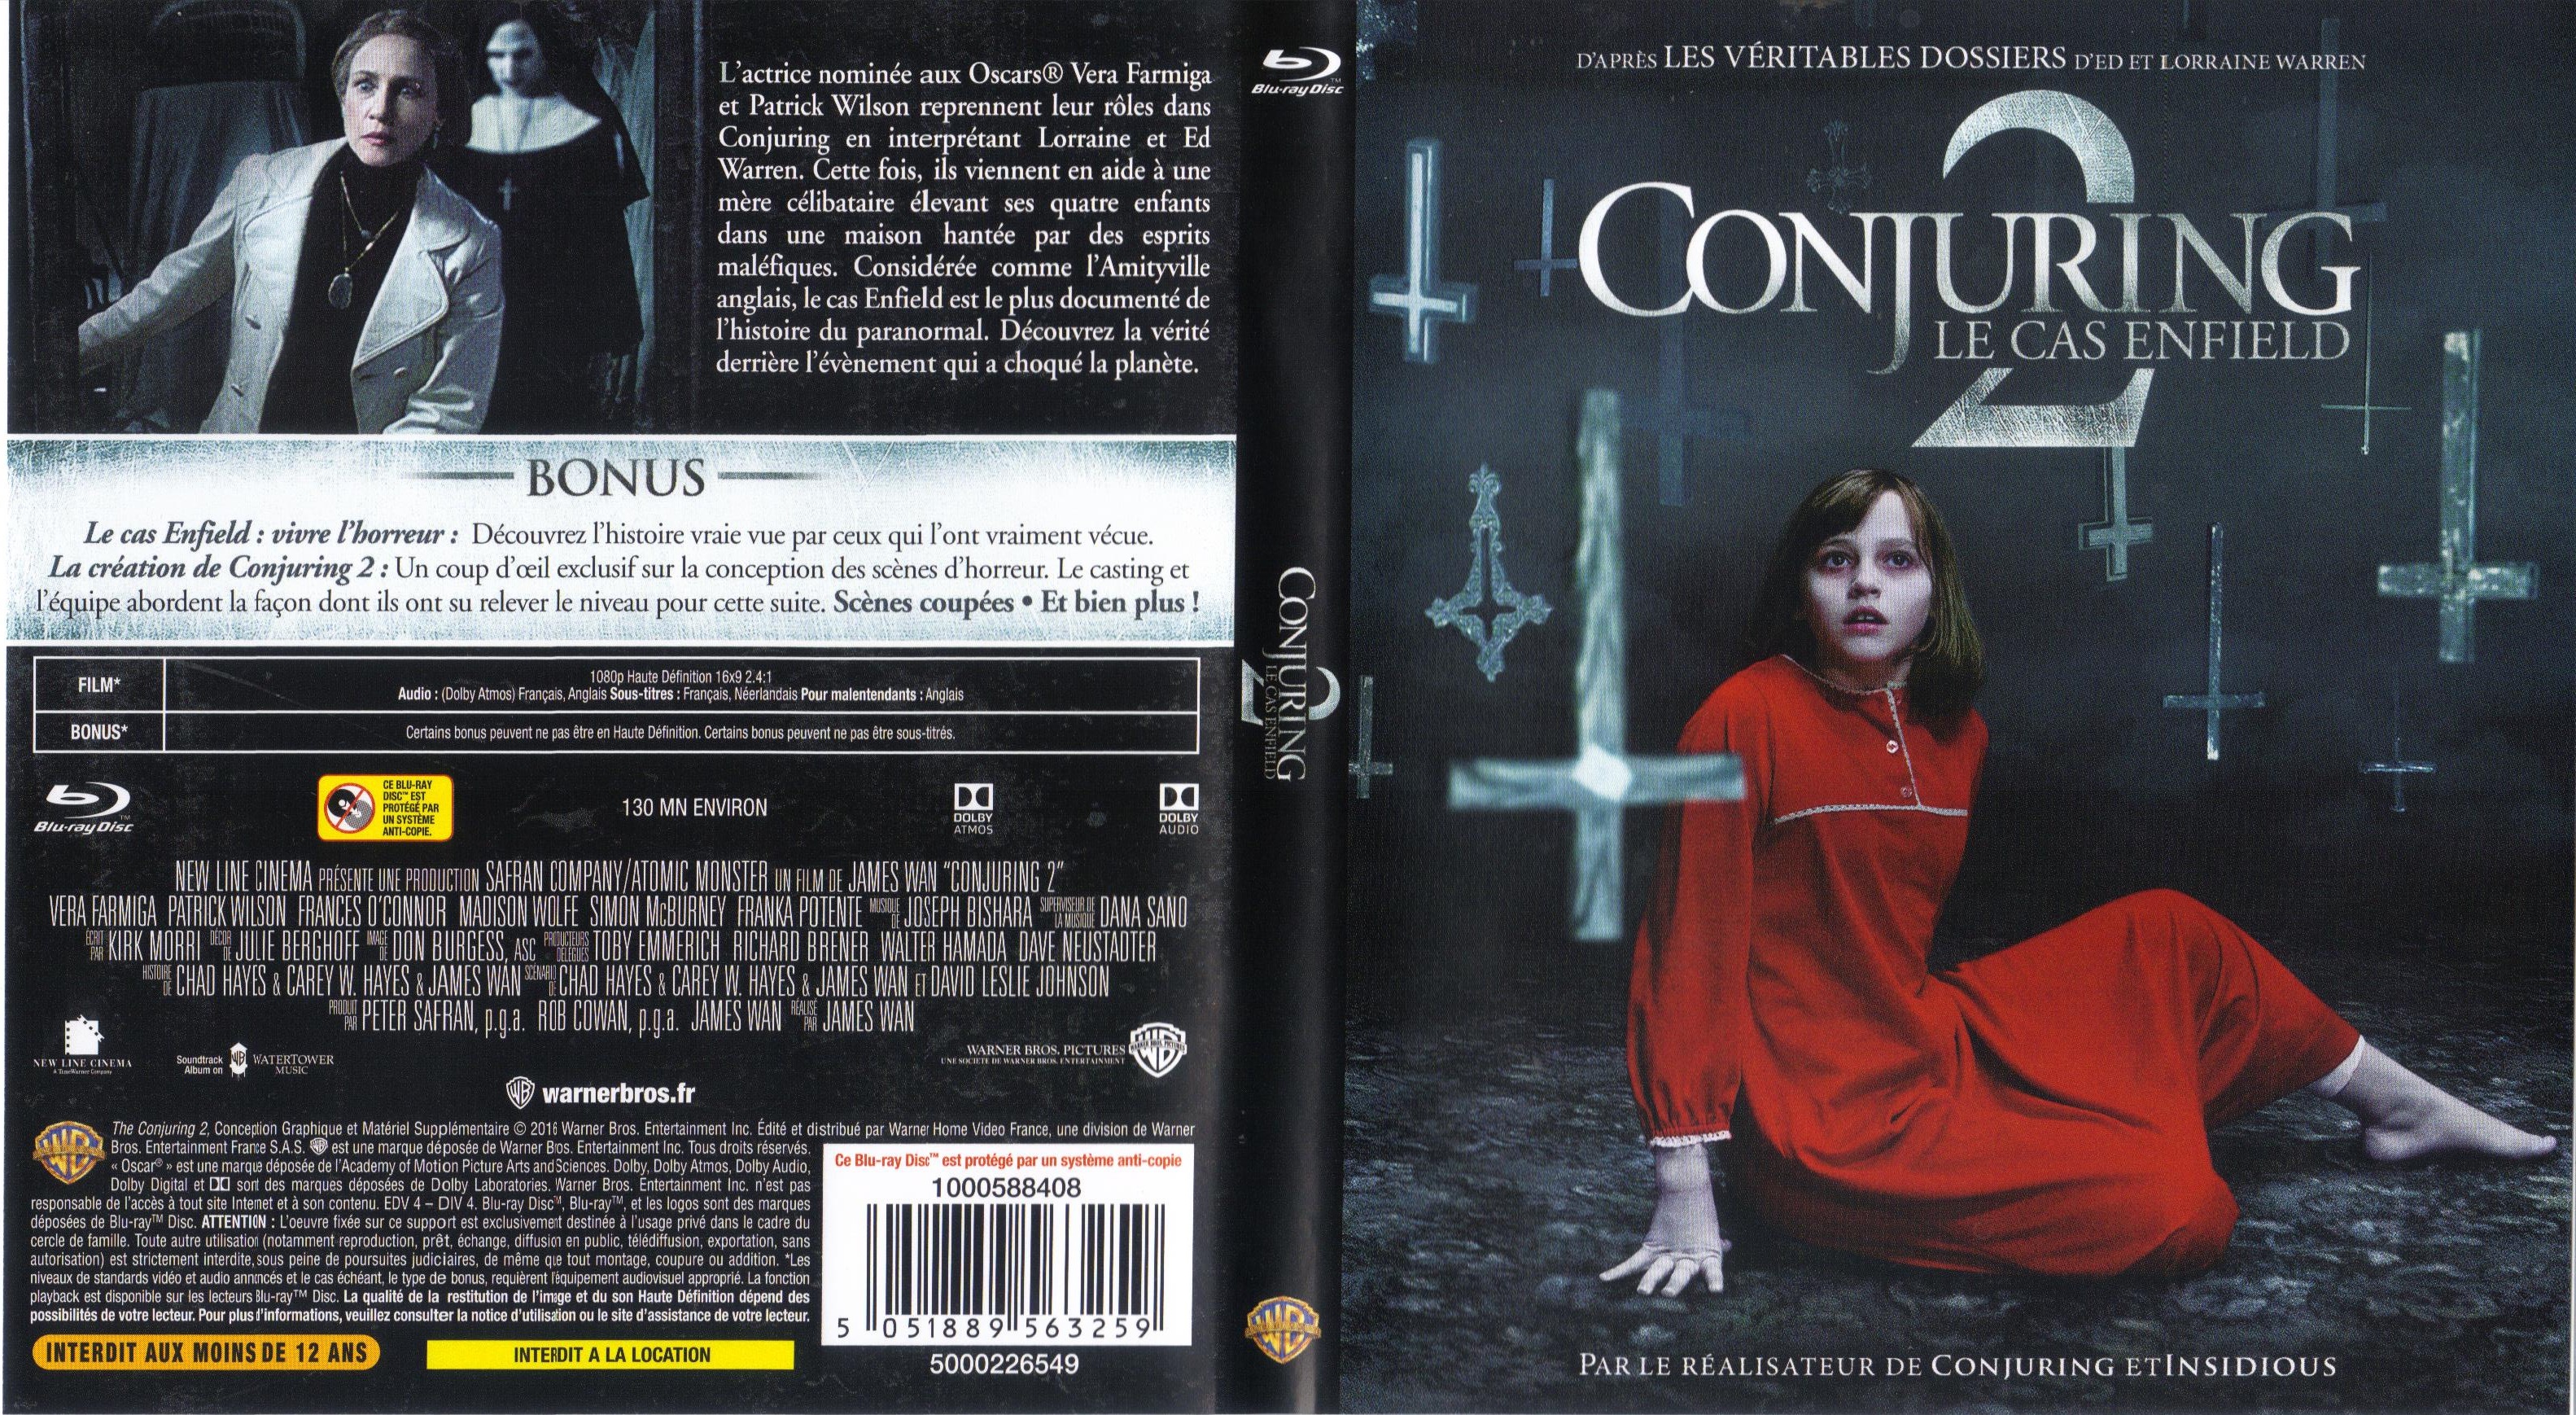 Jaquette DVD Conjuring 2 : Le Cas Enfield (BLU-RAY)